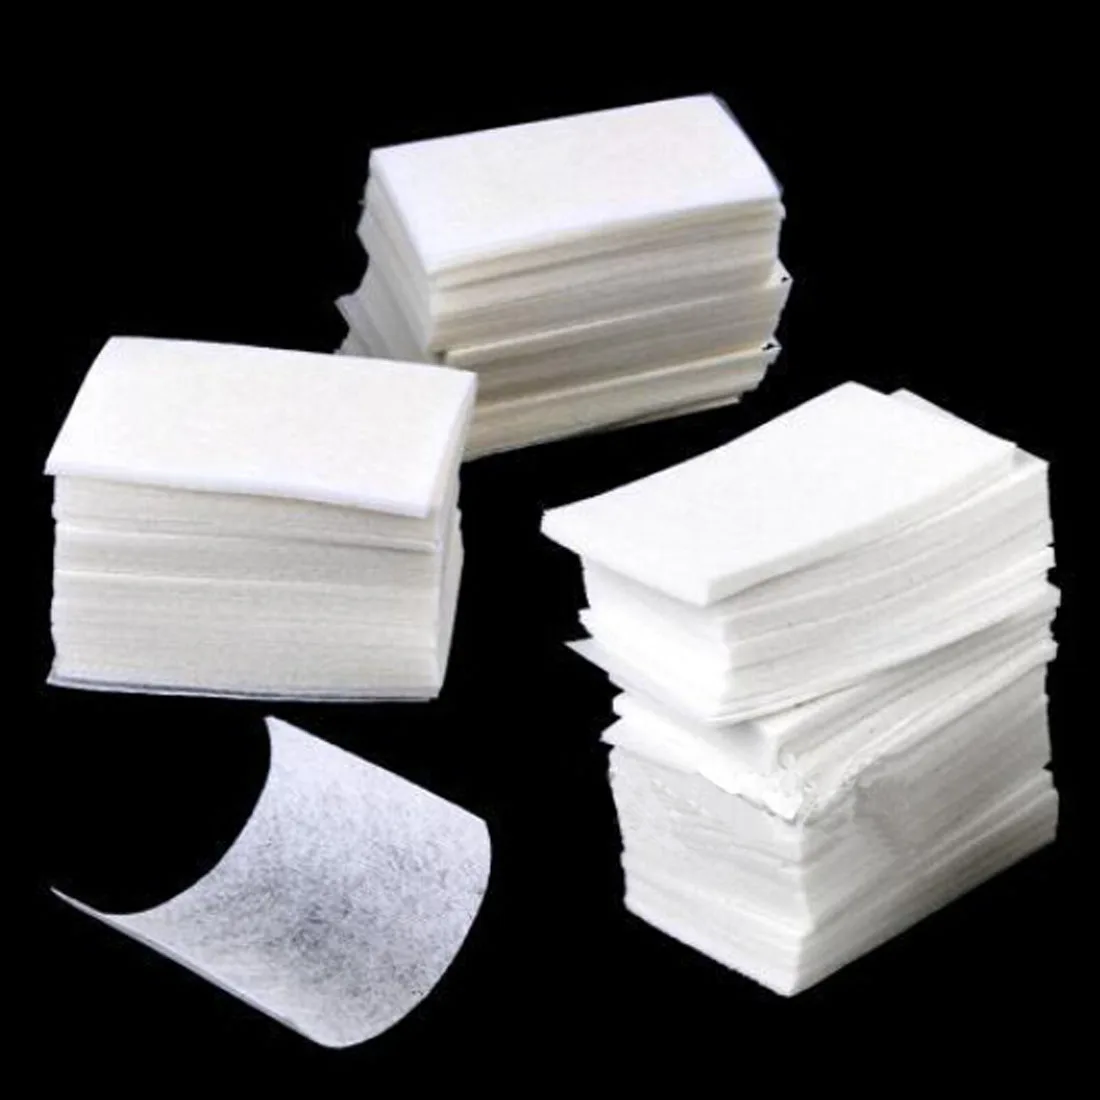 

400pcs/set Nail Art wipe Manicure Polish gel nail Wipes Cotton Lint Cotton Pads Paper Acrylic Gel Tips Nail Art Cleaner Remover